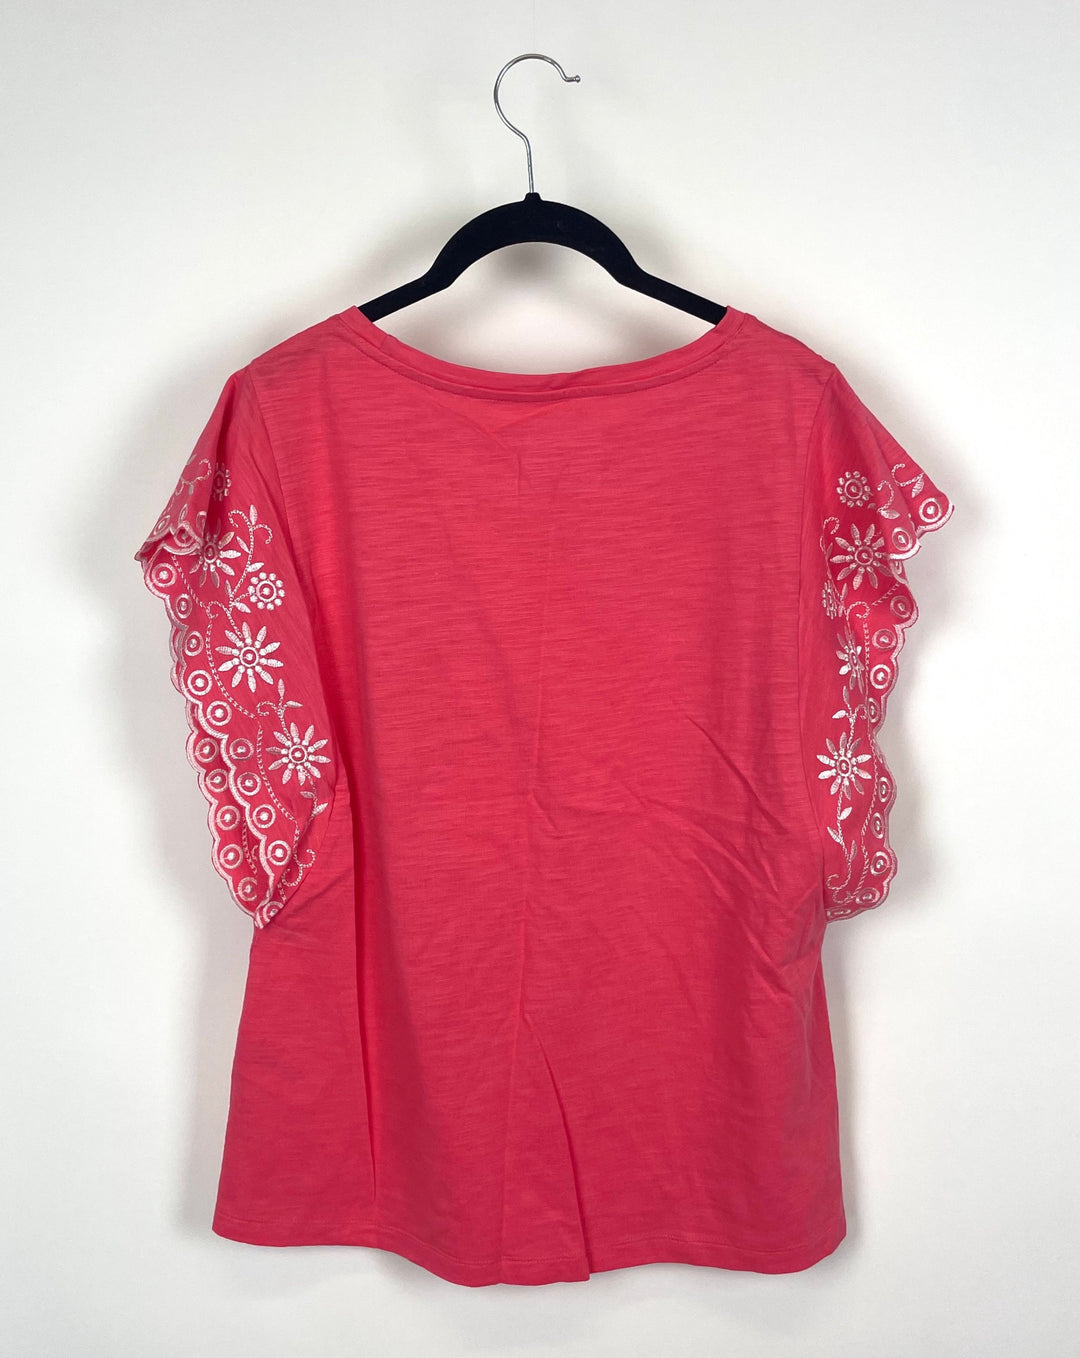 Coral Short Sleeve Winged Embroidered Shirt - Small/Medium